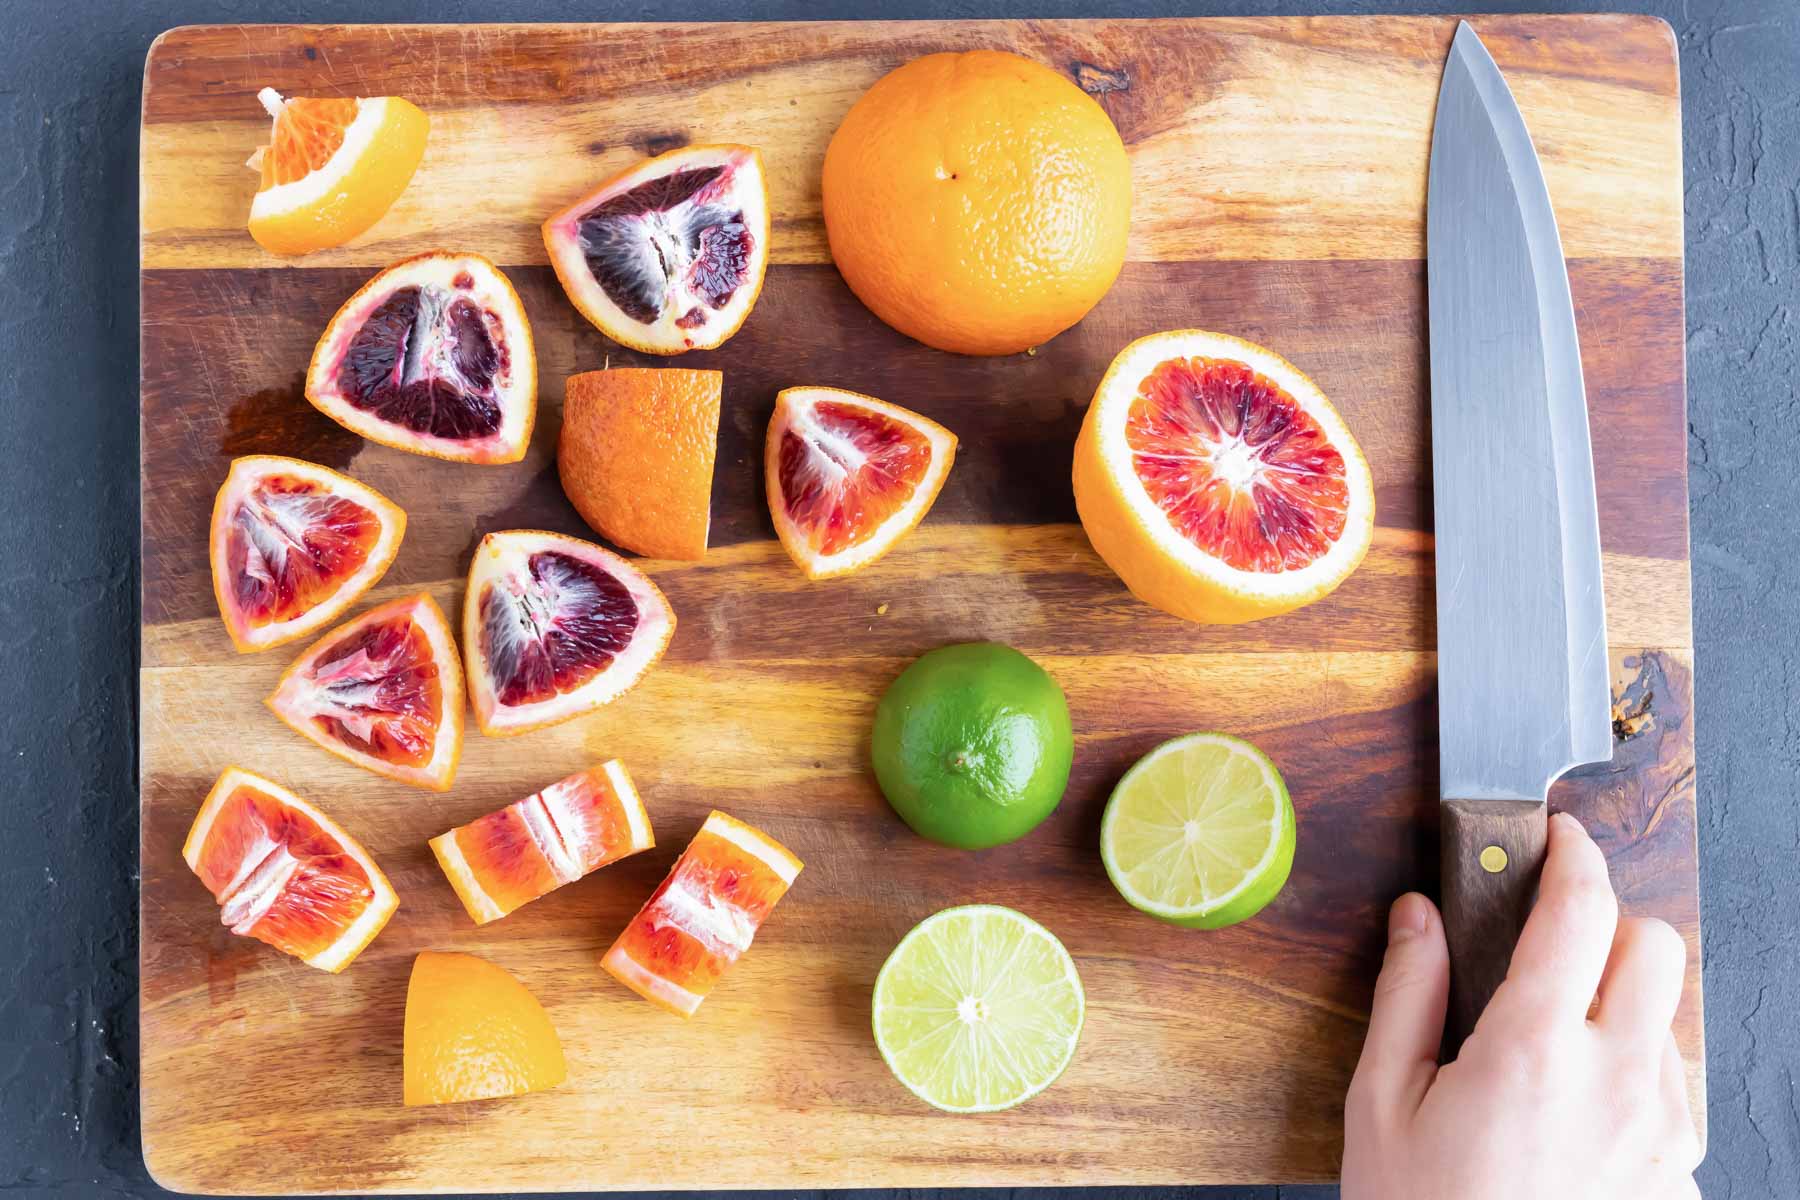 Blood oranges and limes being cut on a wooden cutting board.